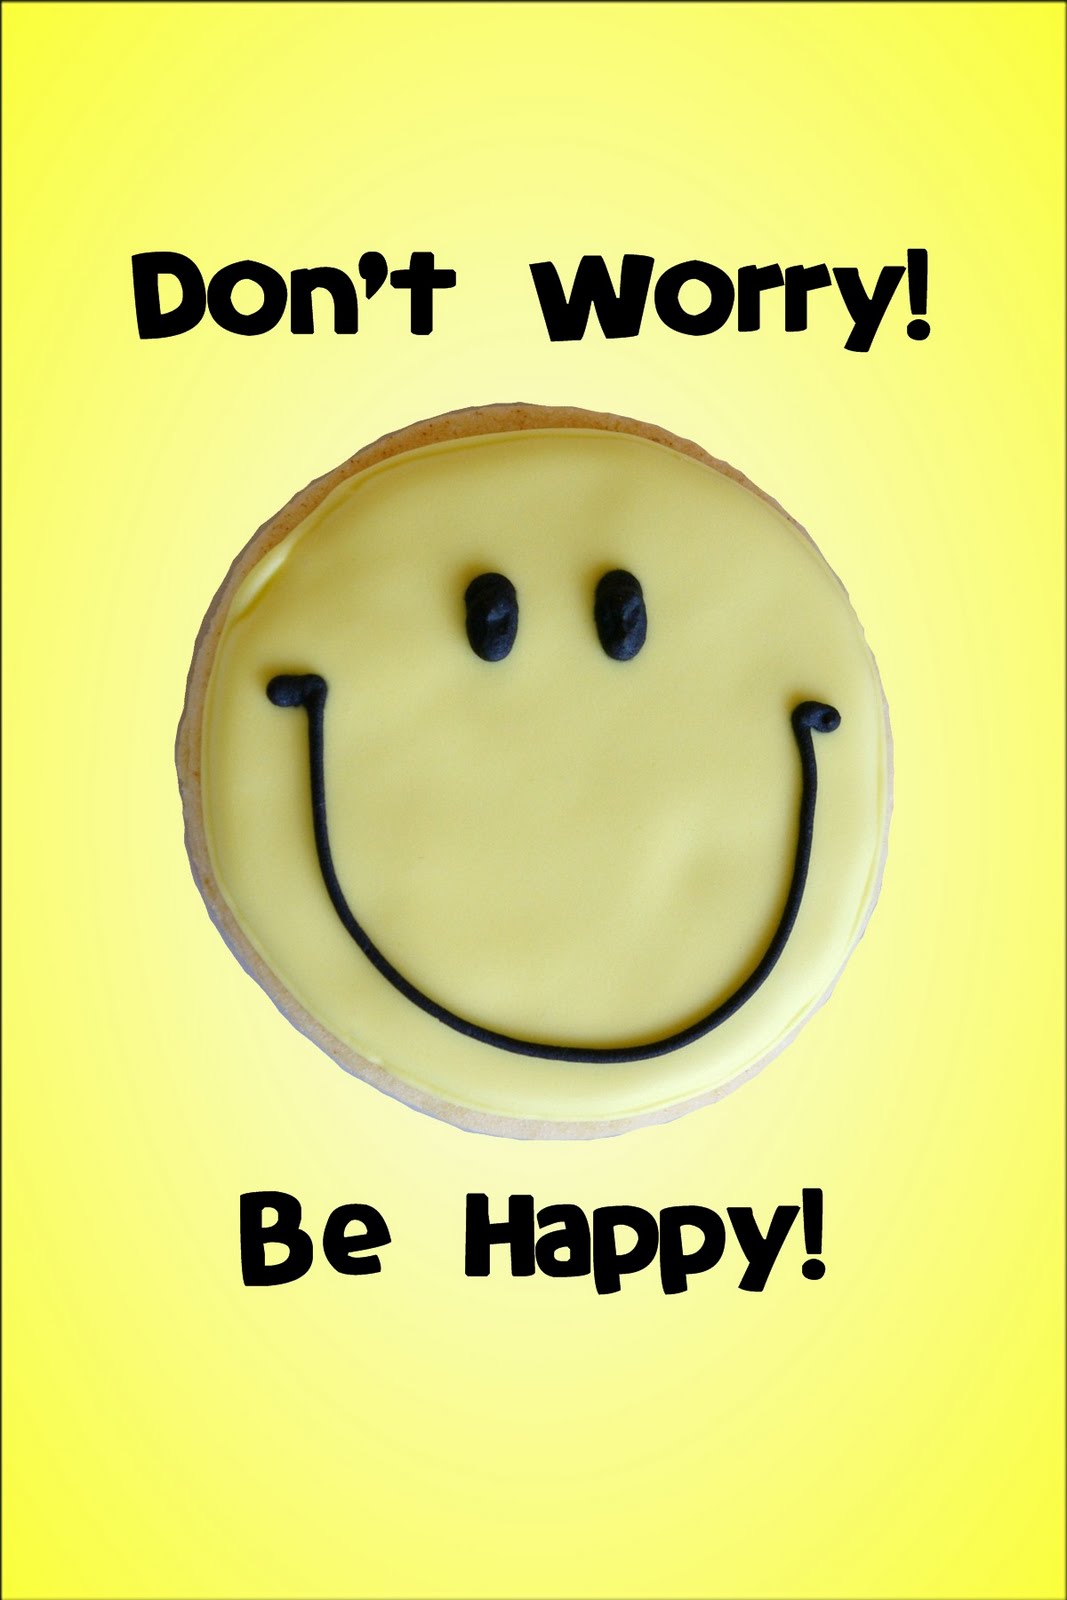 Don t worry dont. Don't worry be Happy. Don't worry be Happy картинки. Донт вори би Хэппи. Don't worry be Happy обои.